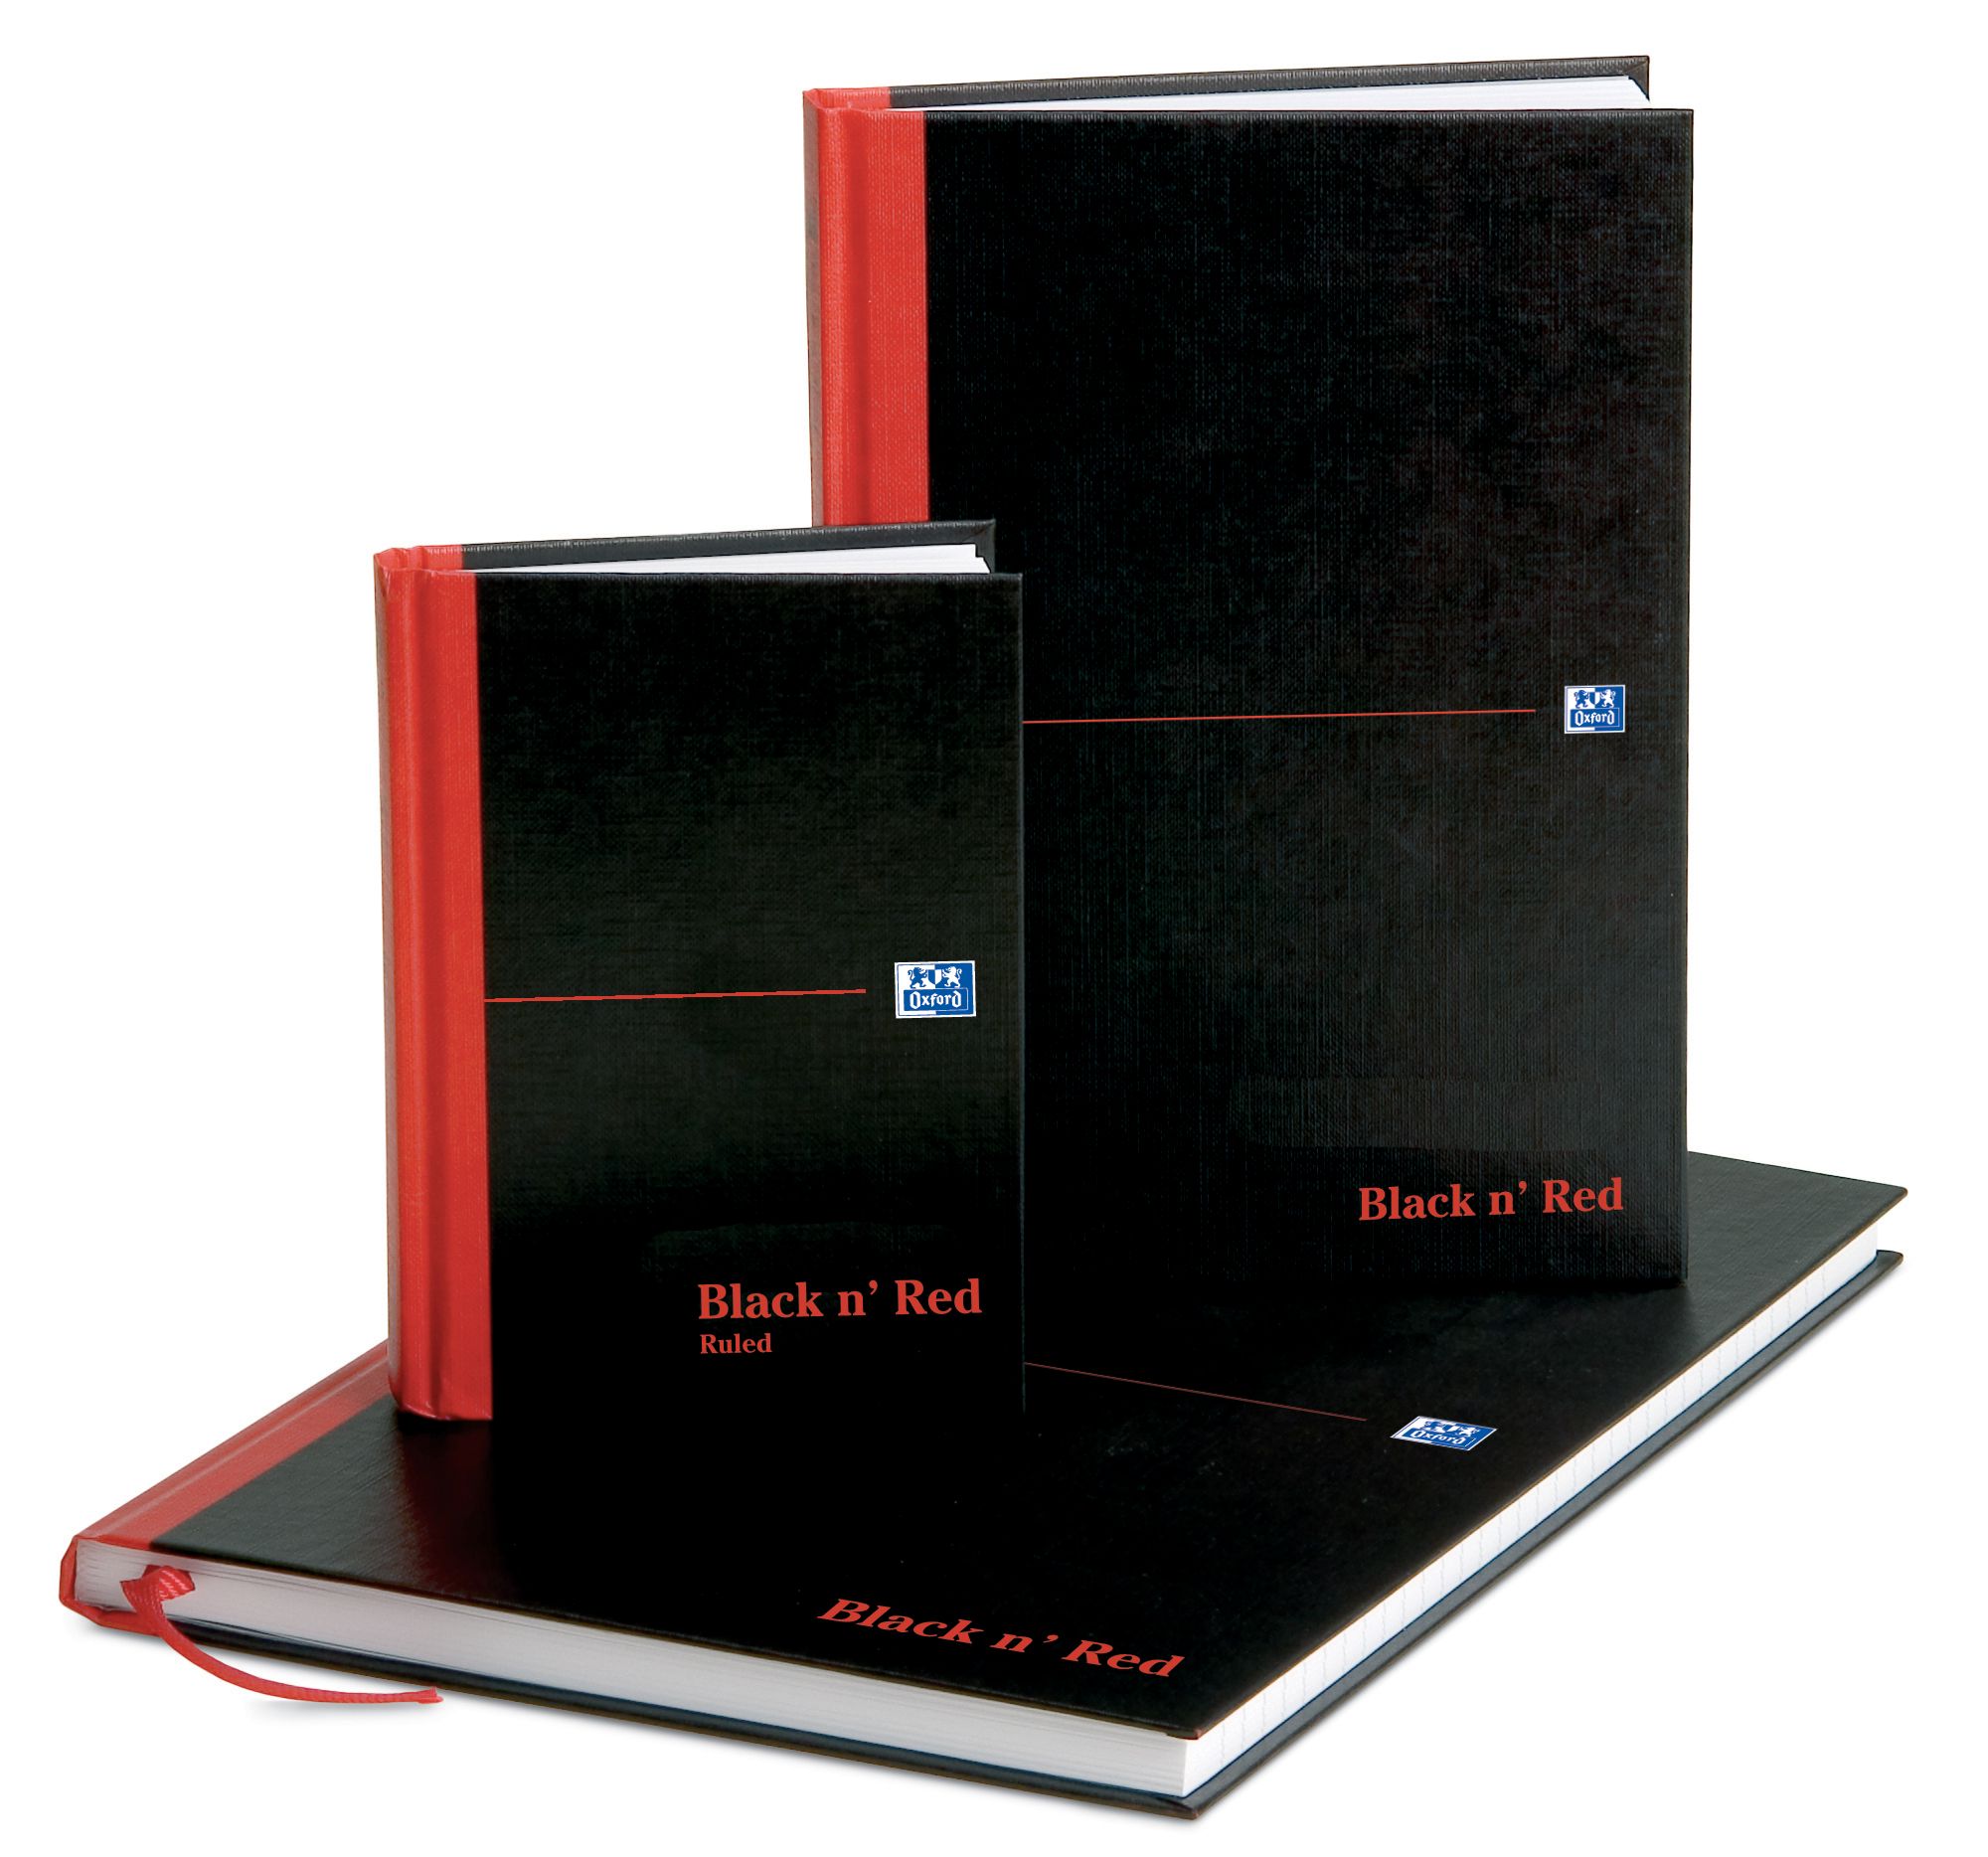 96 Page Narrow Ruled with Margin Oxford Black n Red A4 Hardback Casebound Notebook 1 Notebook